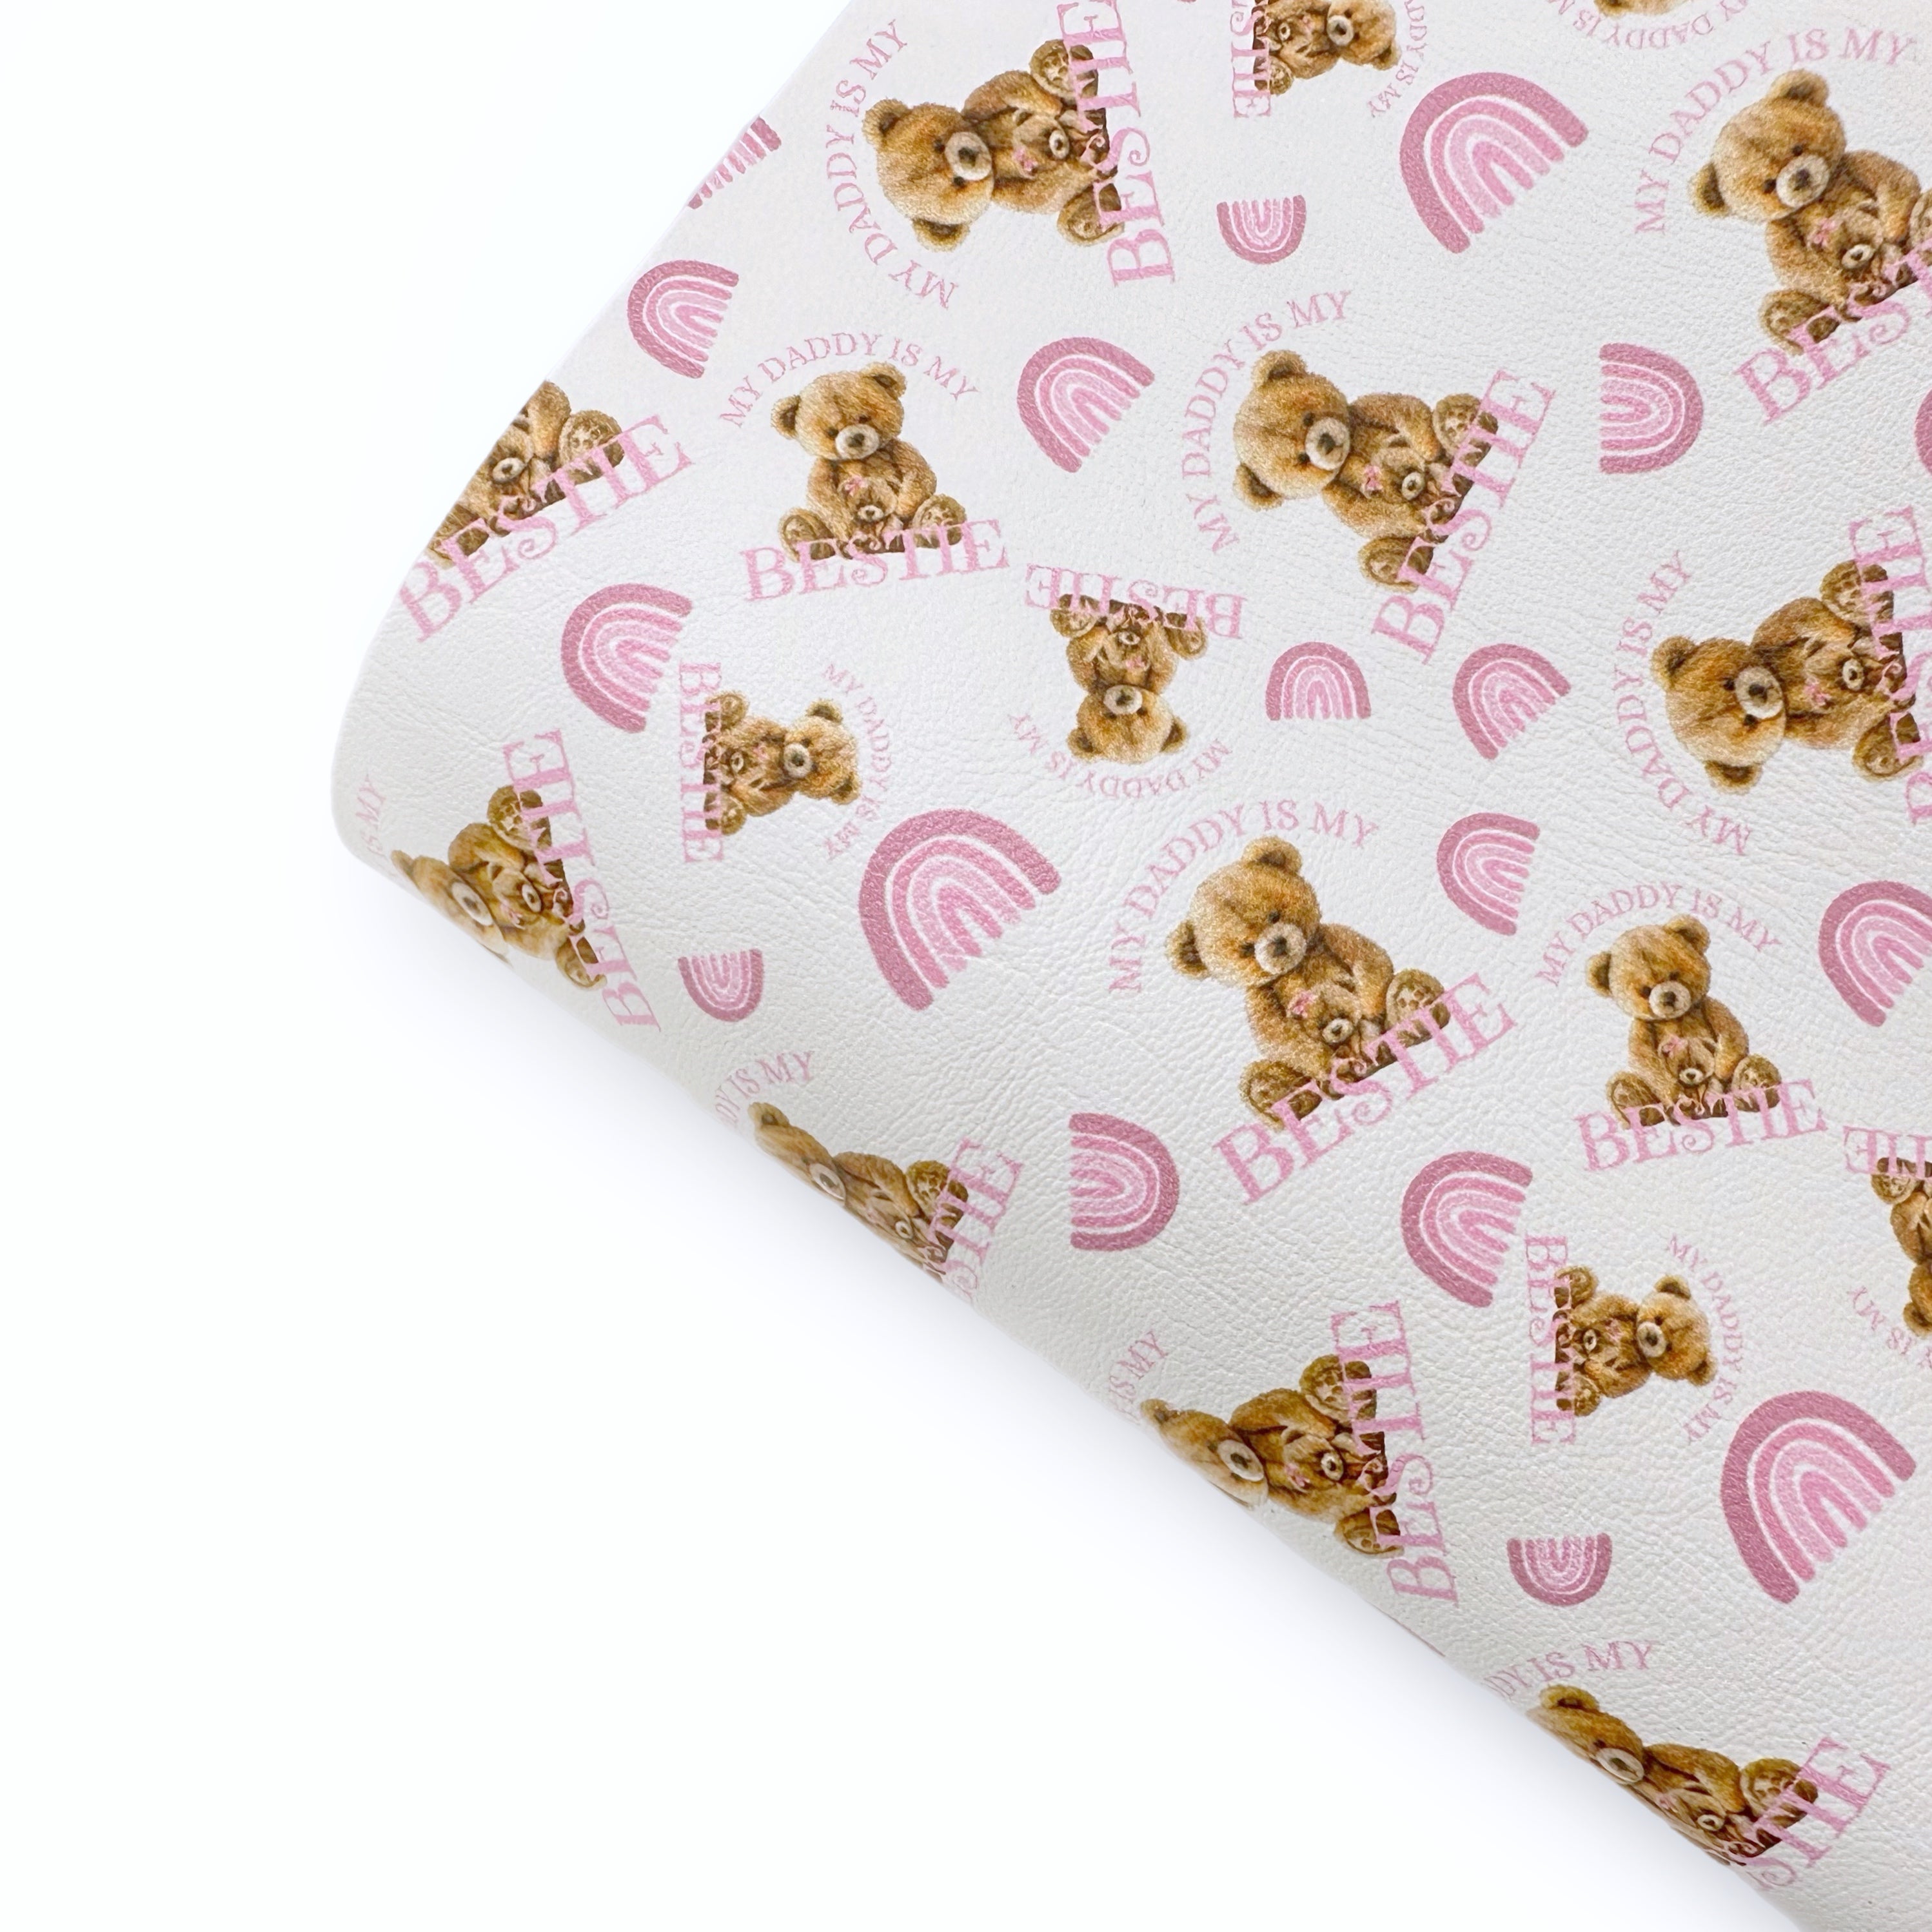 My Daddy is my Bestie Teddy Pink Premium Faux Leather Fabric